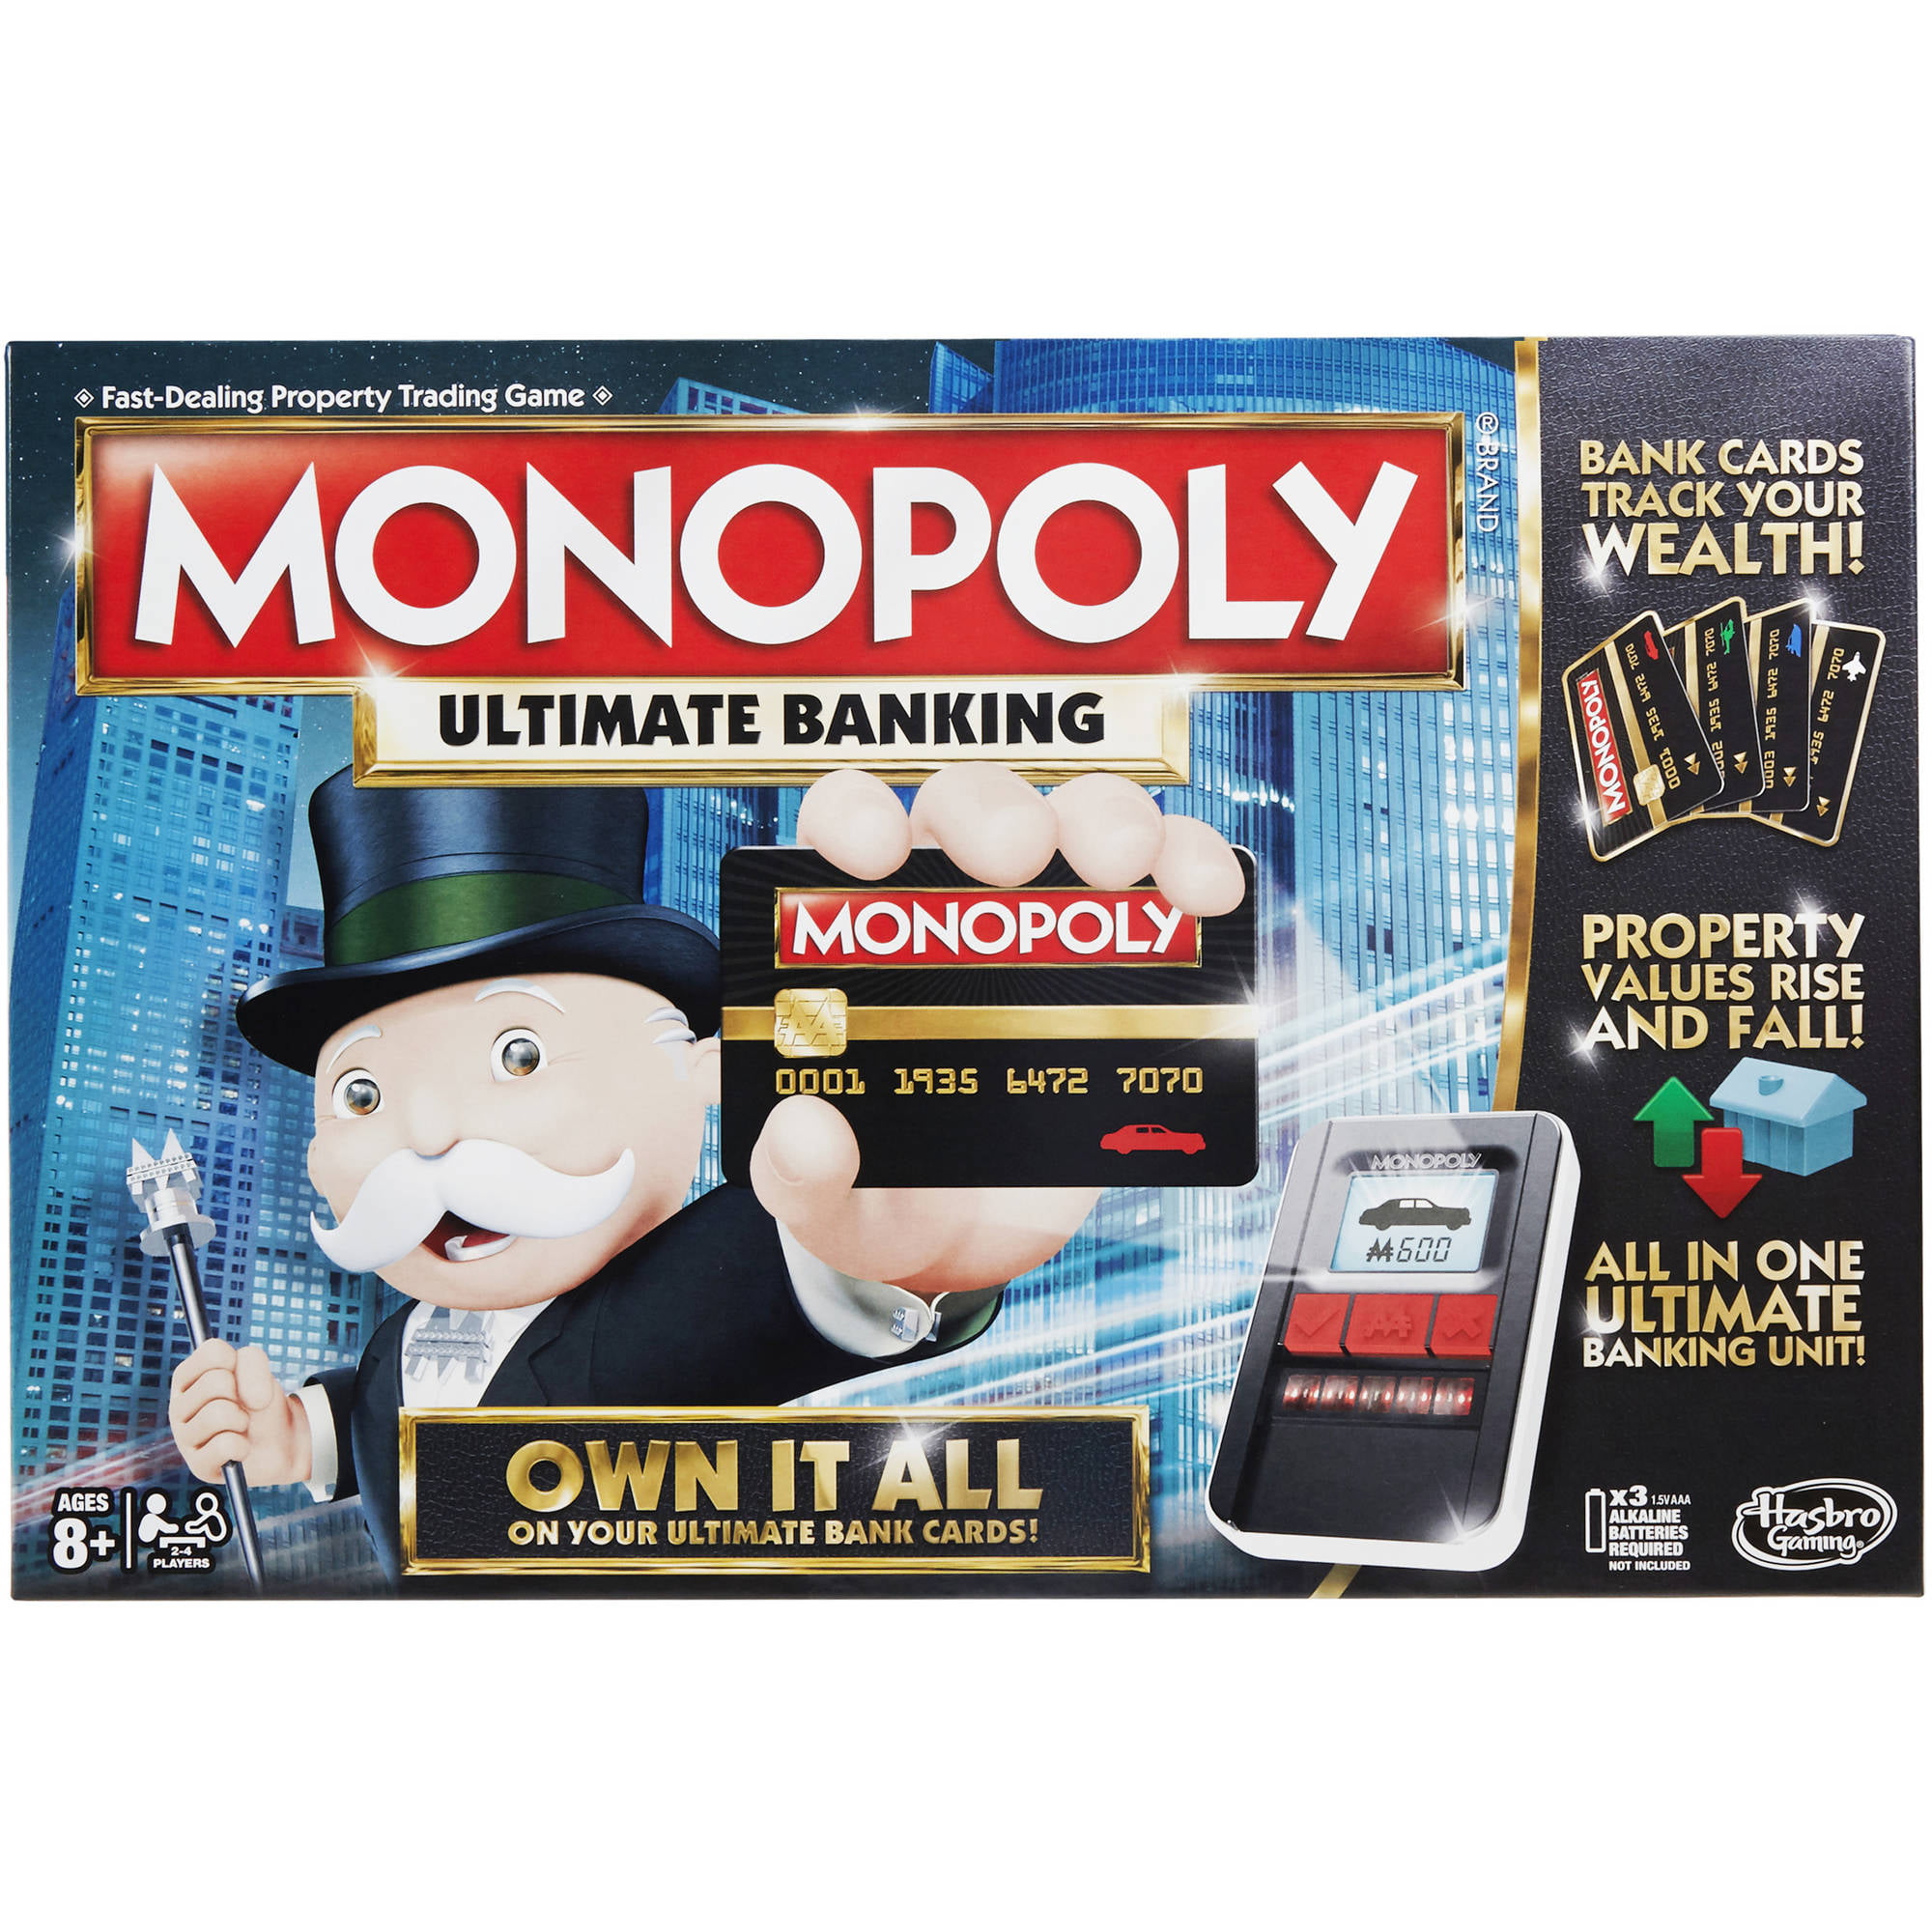 MONOPOLY ULTIMATE BANKING 